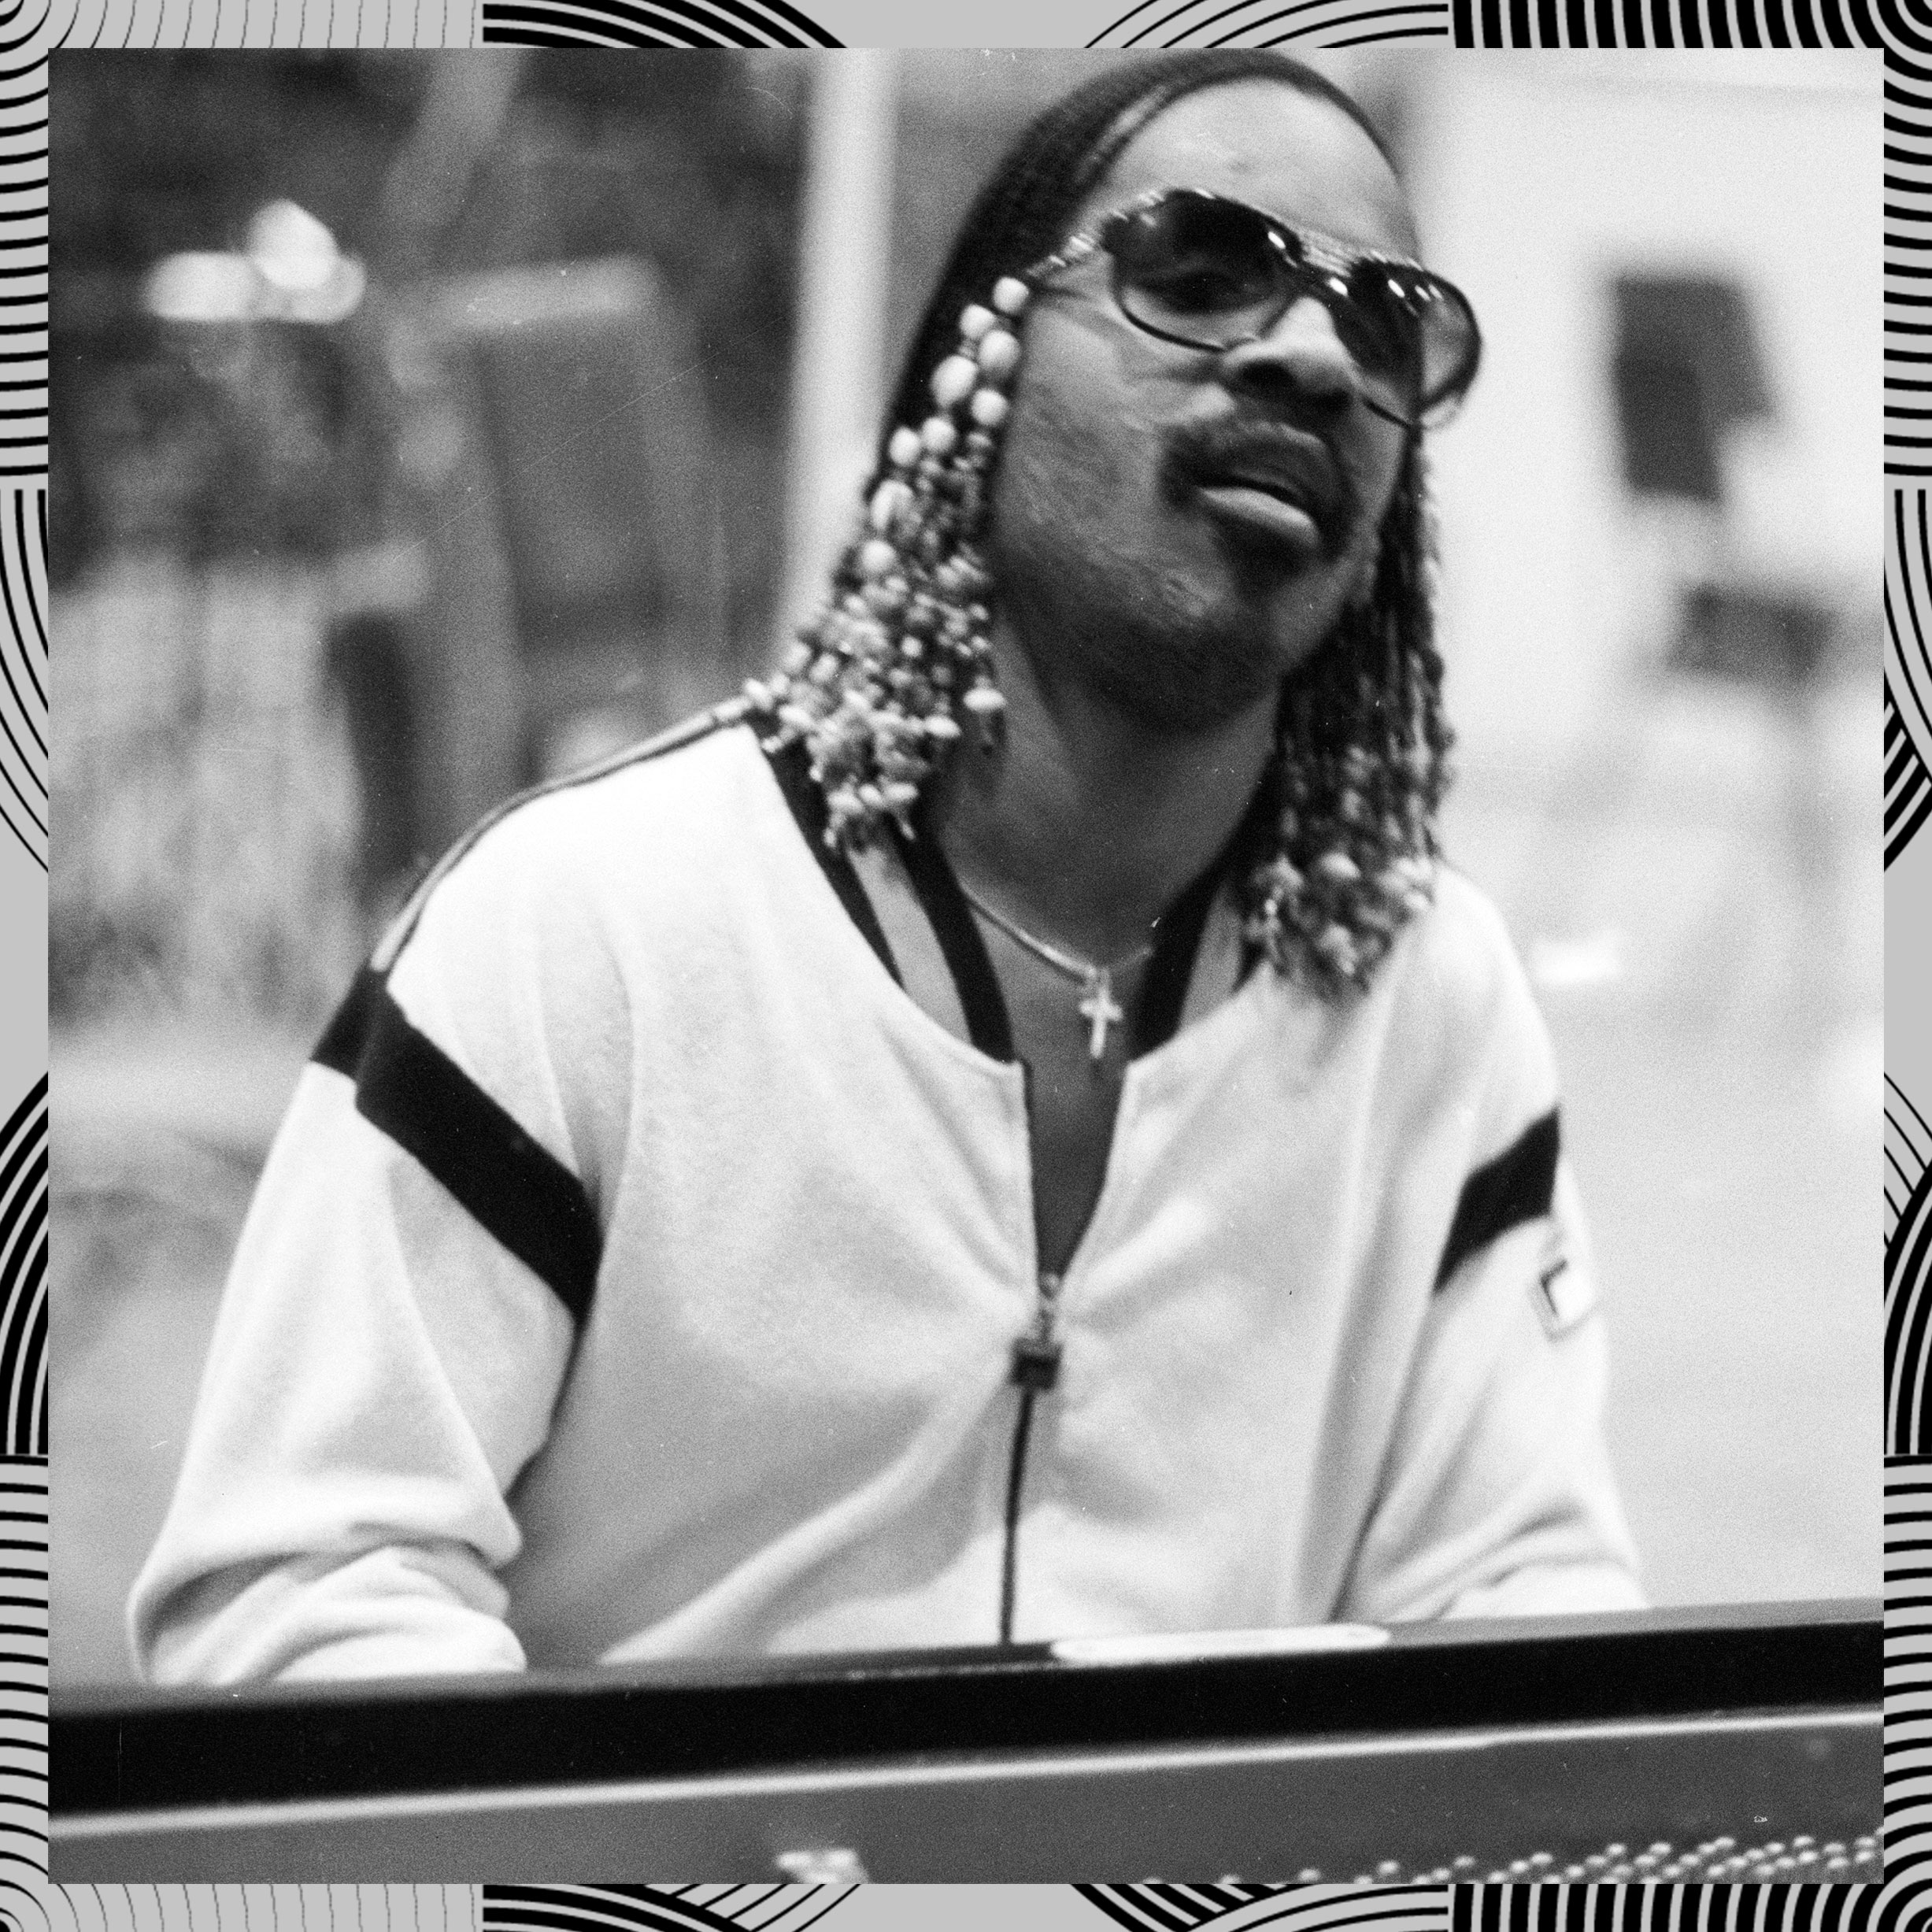 sikkerhed Fremskreden Intakt Abbey Road Studios på Twitter: "Happy Birthday to the legendary  @StevieWonder who turns 71 today! Stevie pictured here at Abbey Road in  1980. What's your favourite song from Stevie Wonder? #HappyBirthdayStevie  https://t.co/djzmyitGt8" /